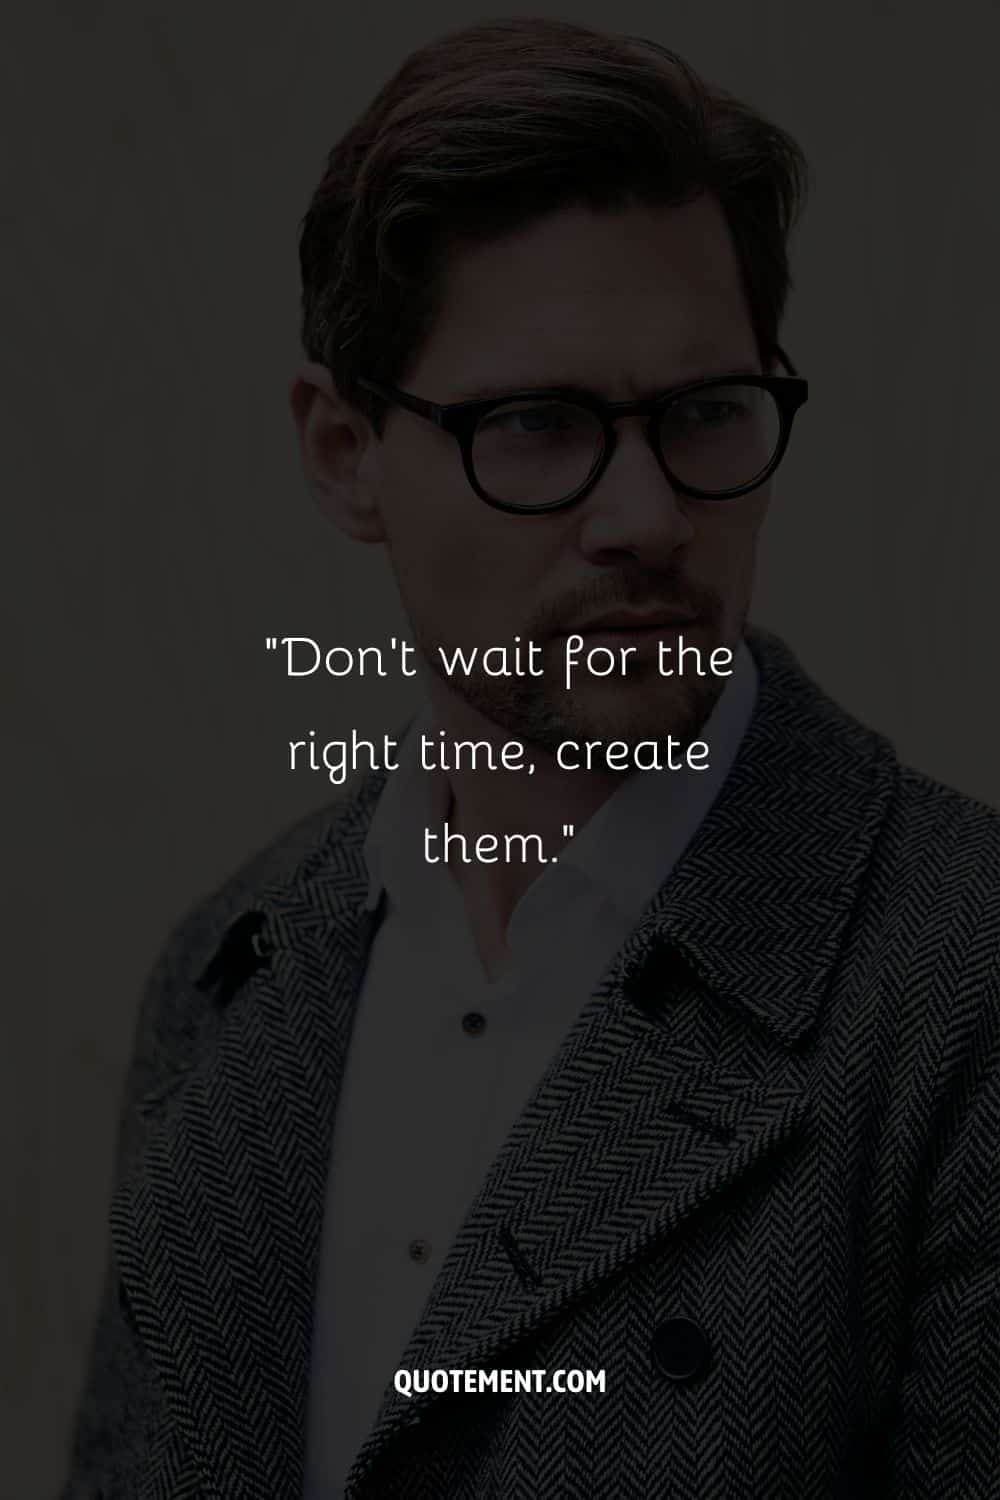 “Don't wait for the right time, create them.”